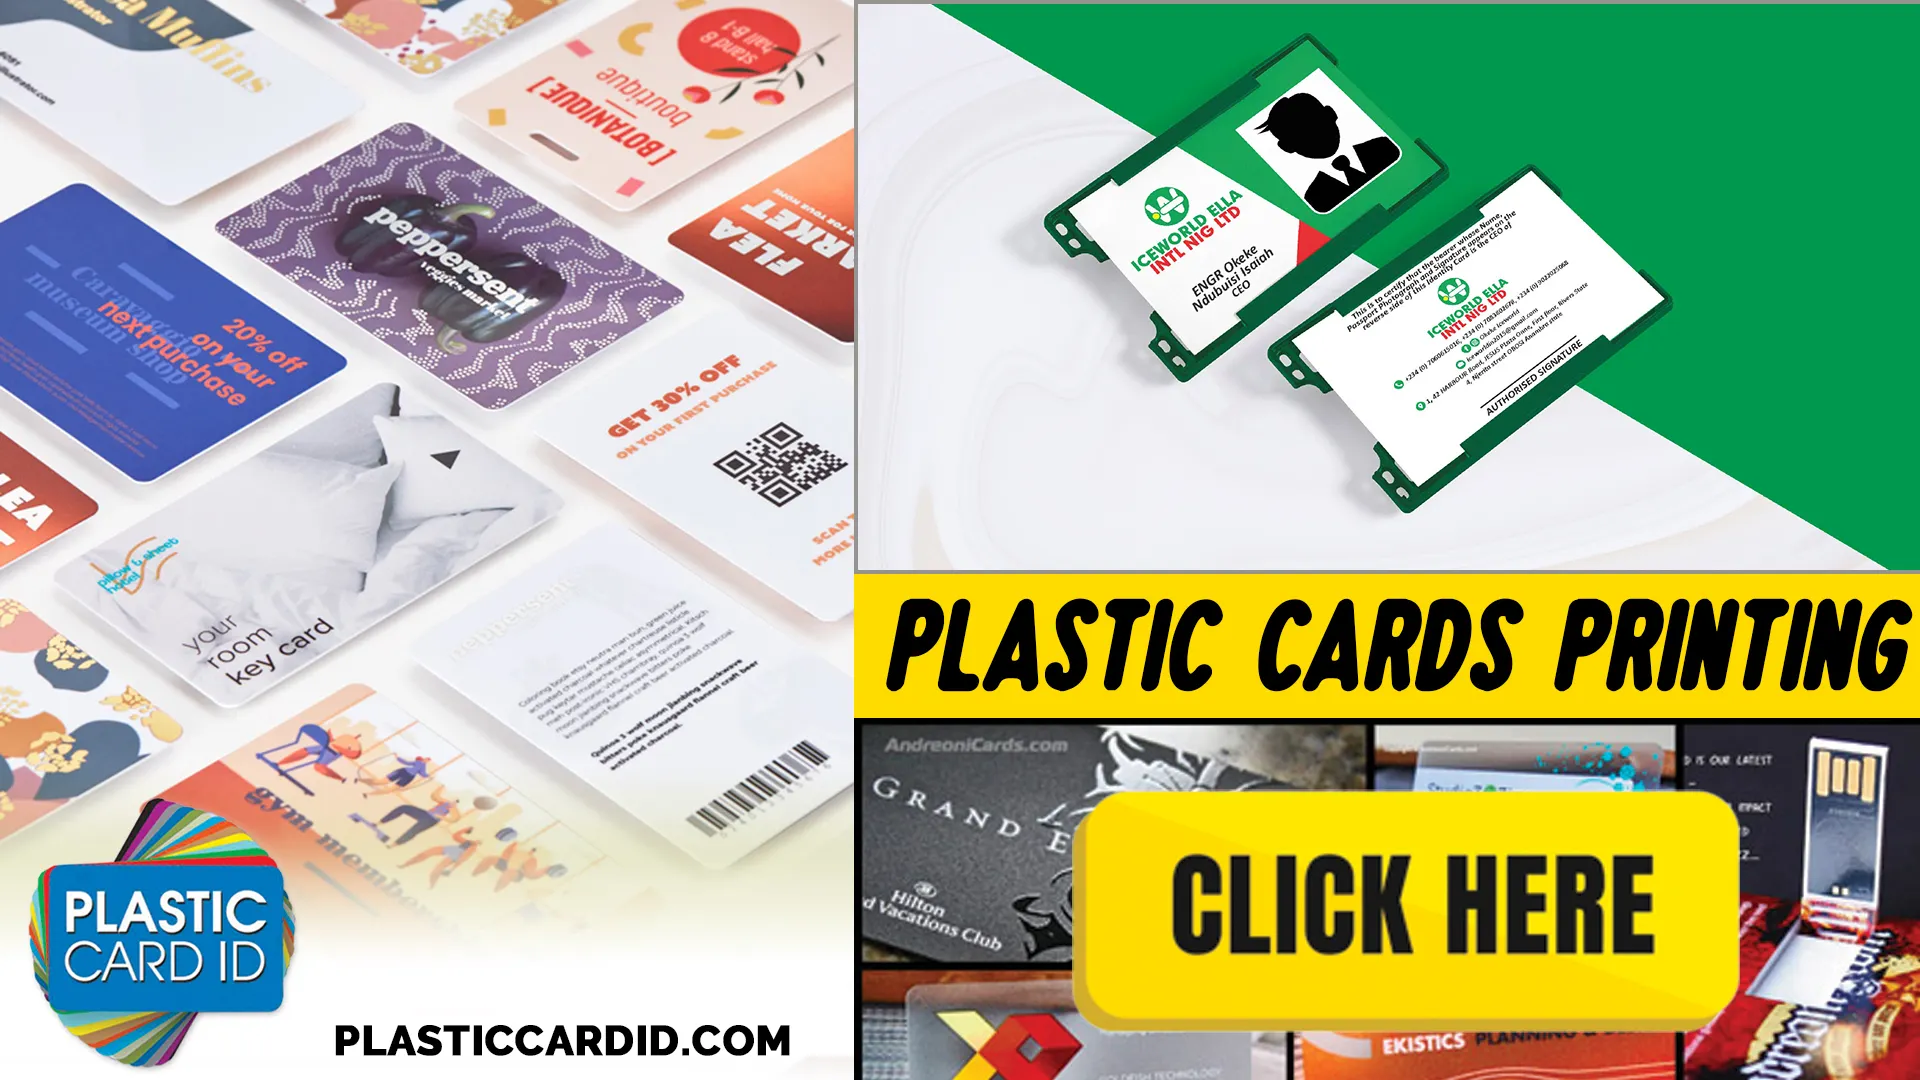 Welcome to Plastic Card ID
: Your Guard Against Modern Security Risks in Card Printing